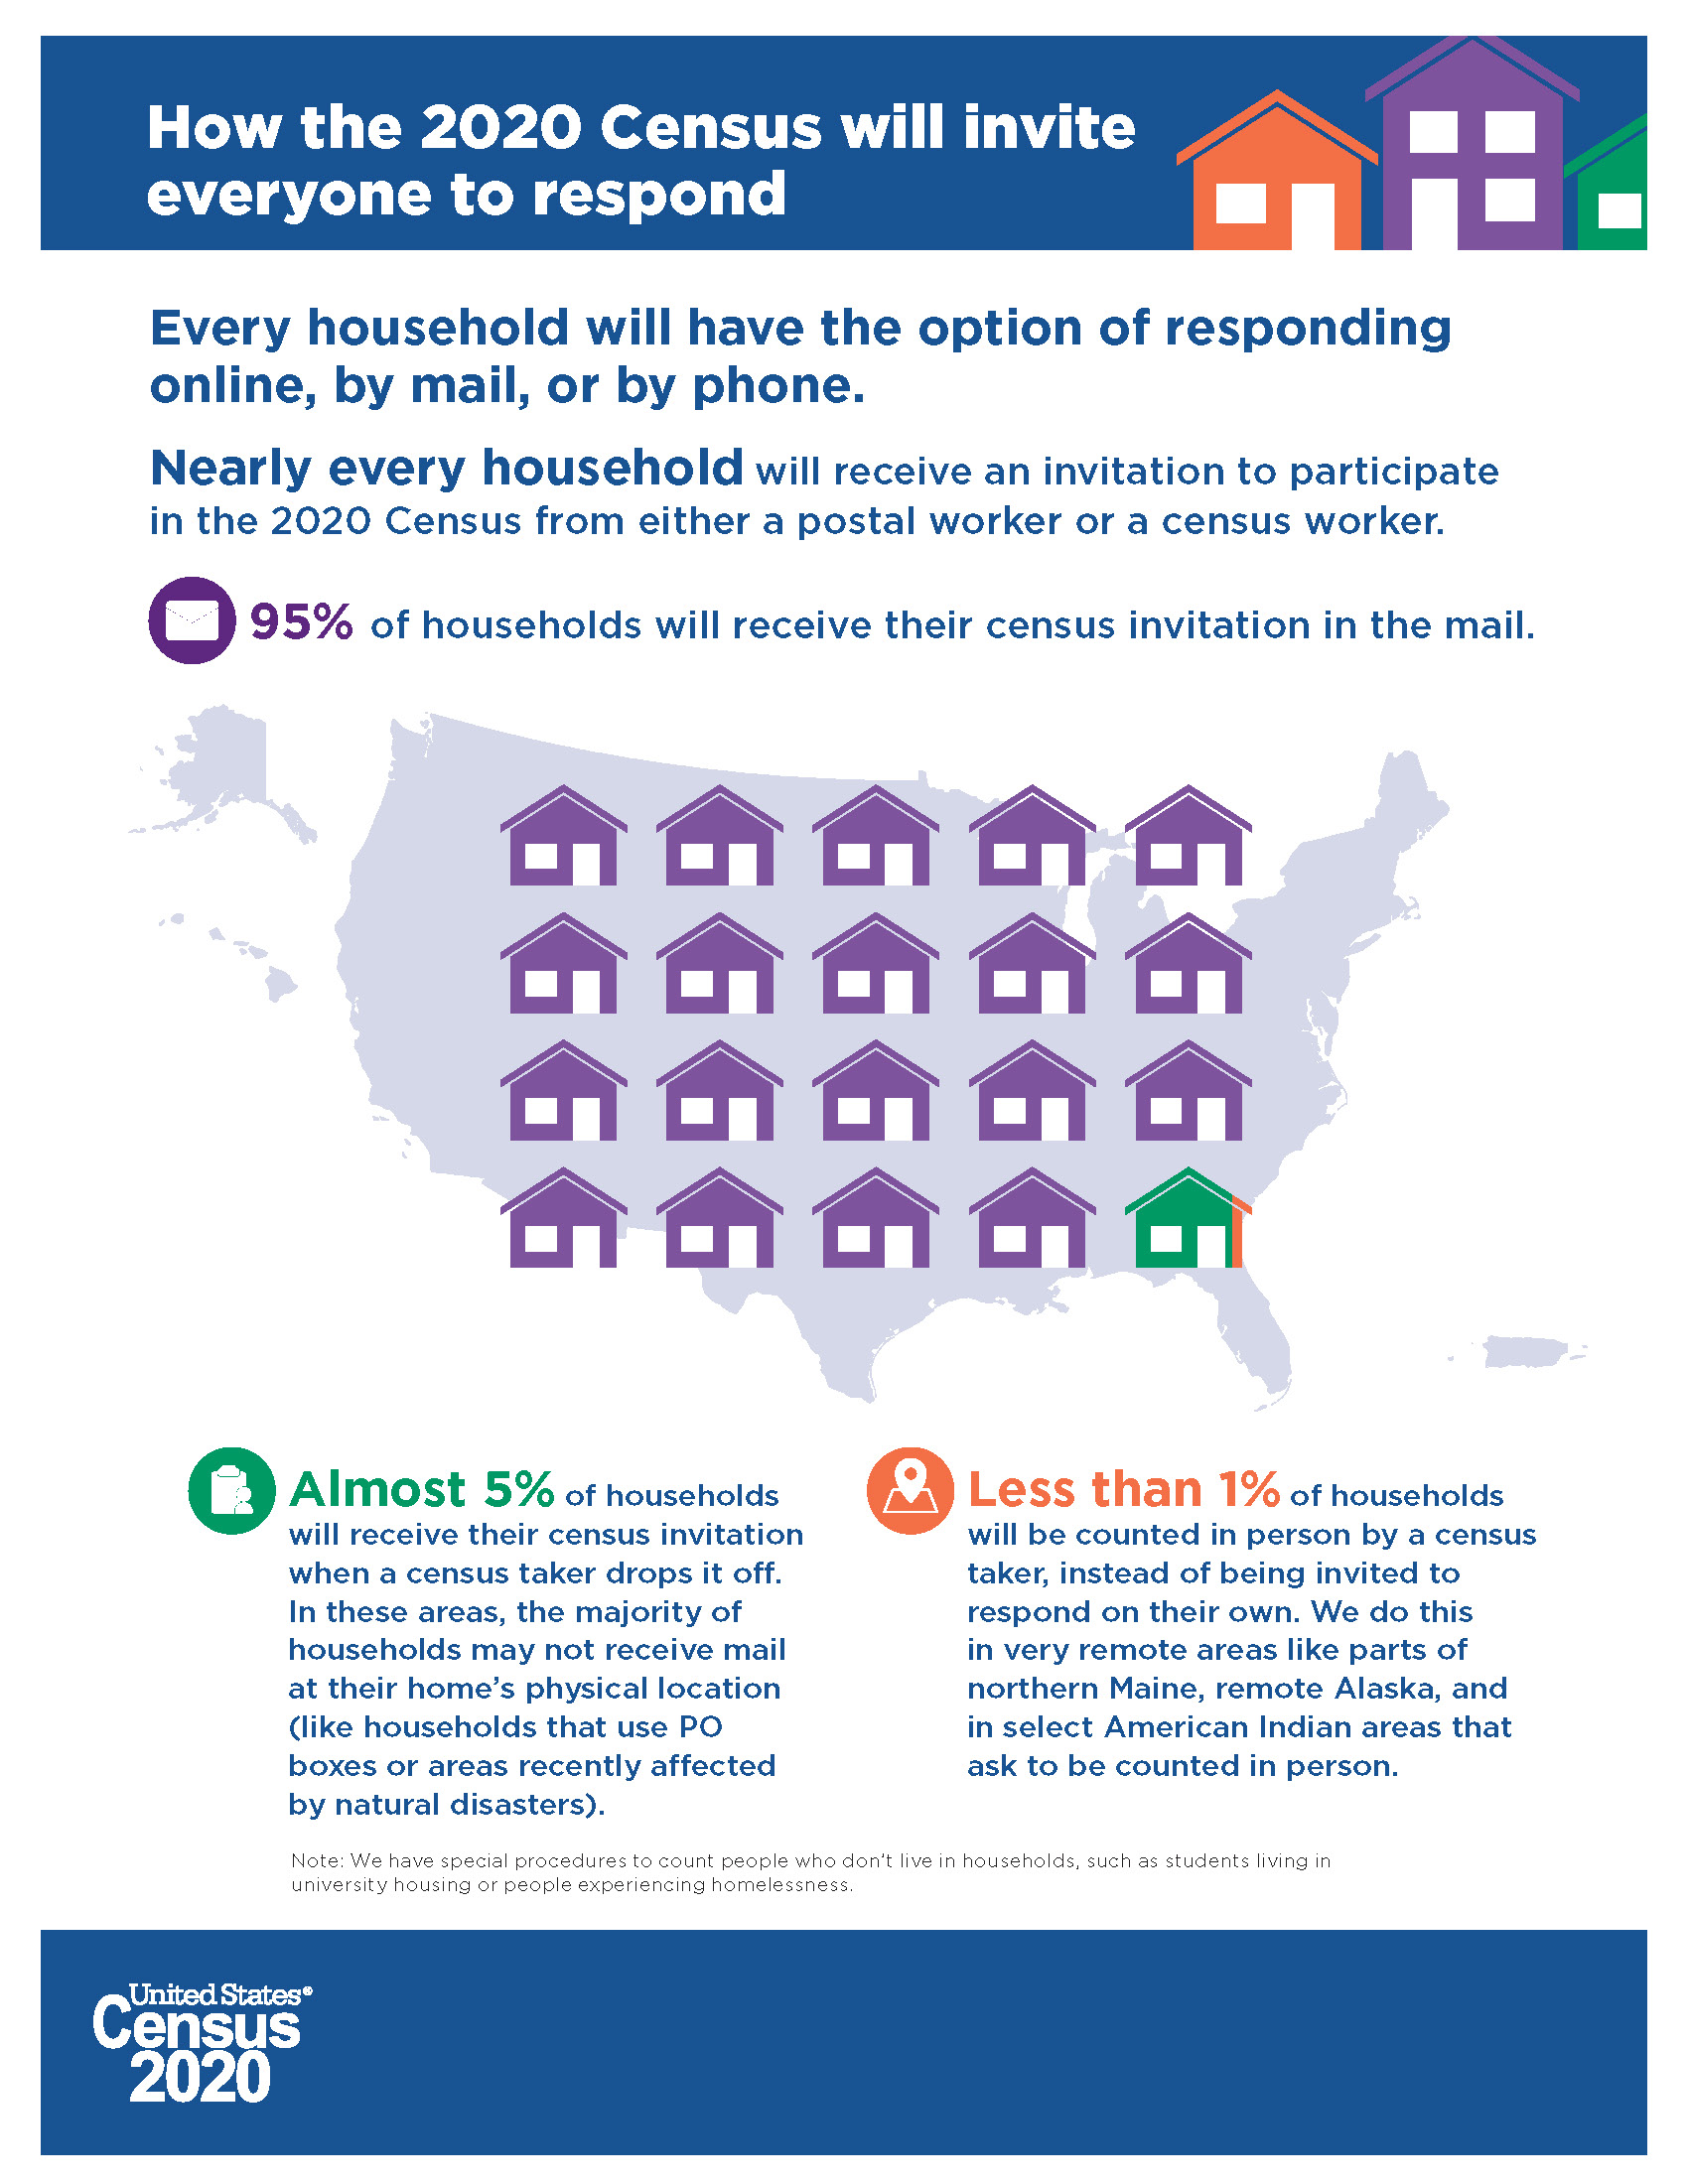 Infographic - How the 2020 Census will invite everyone to respond 1